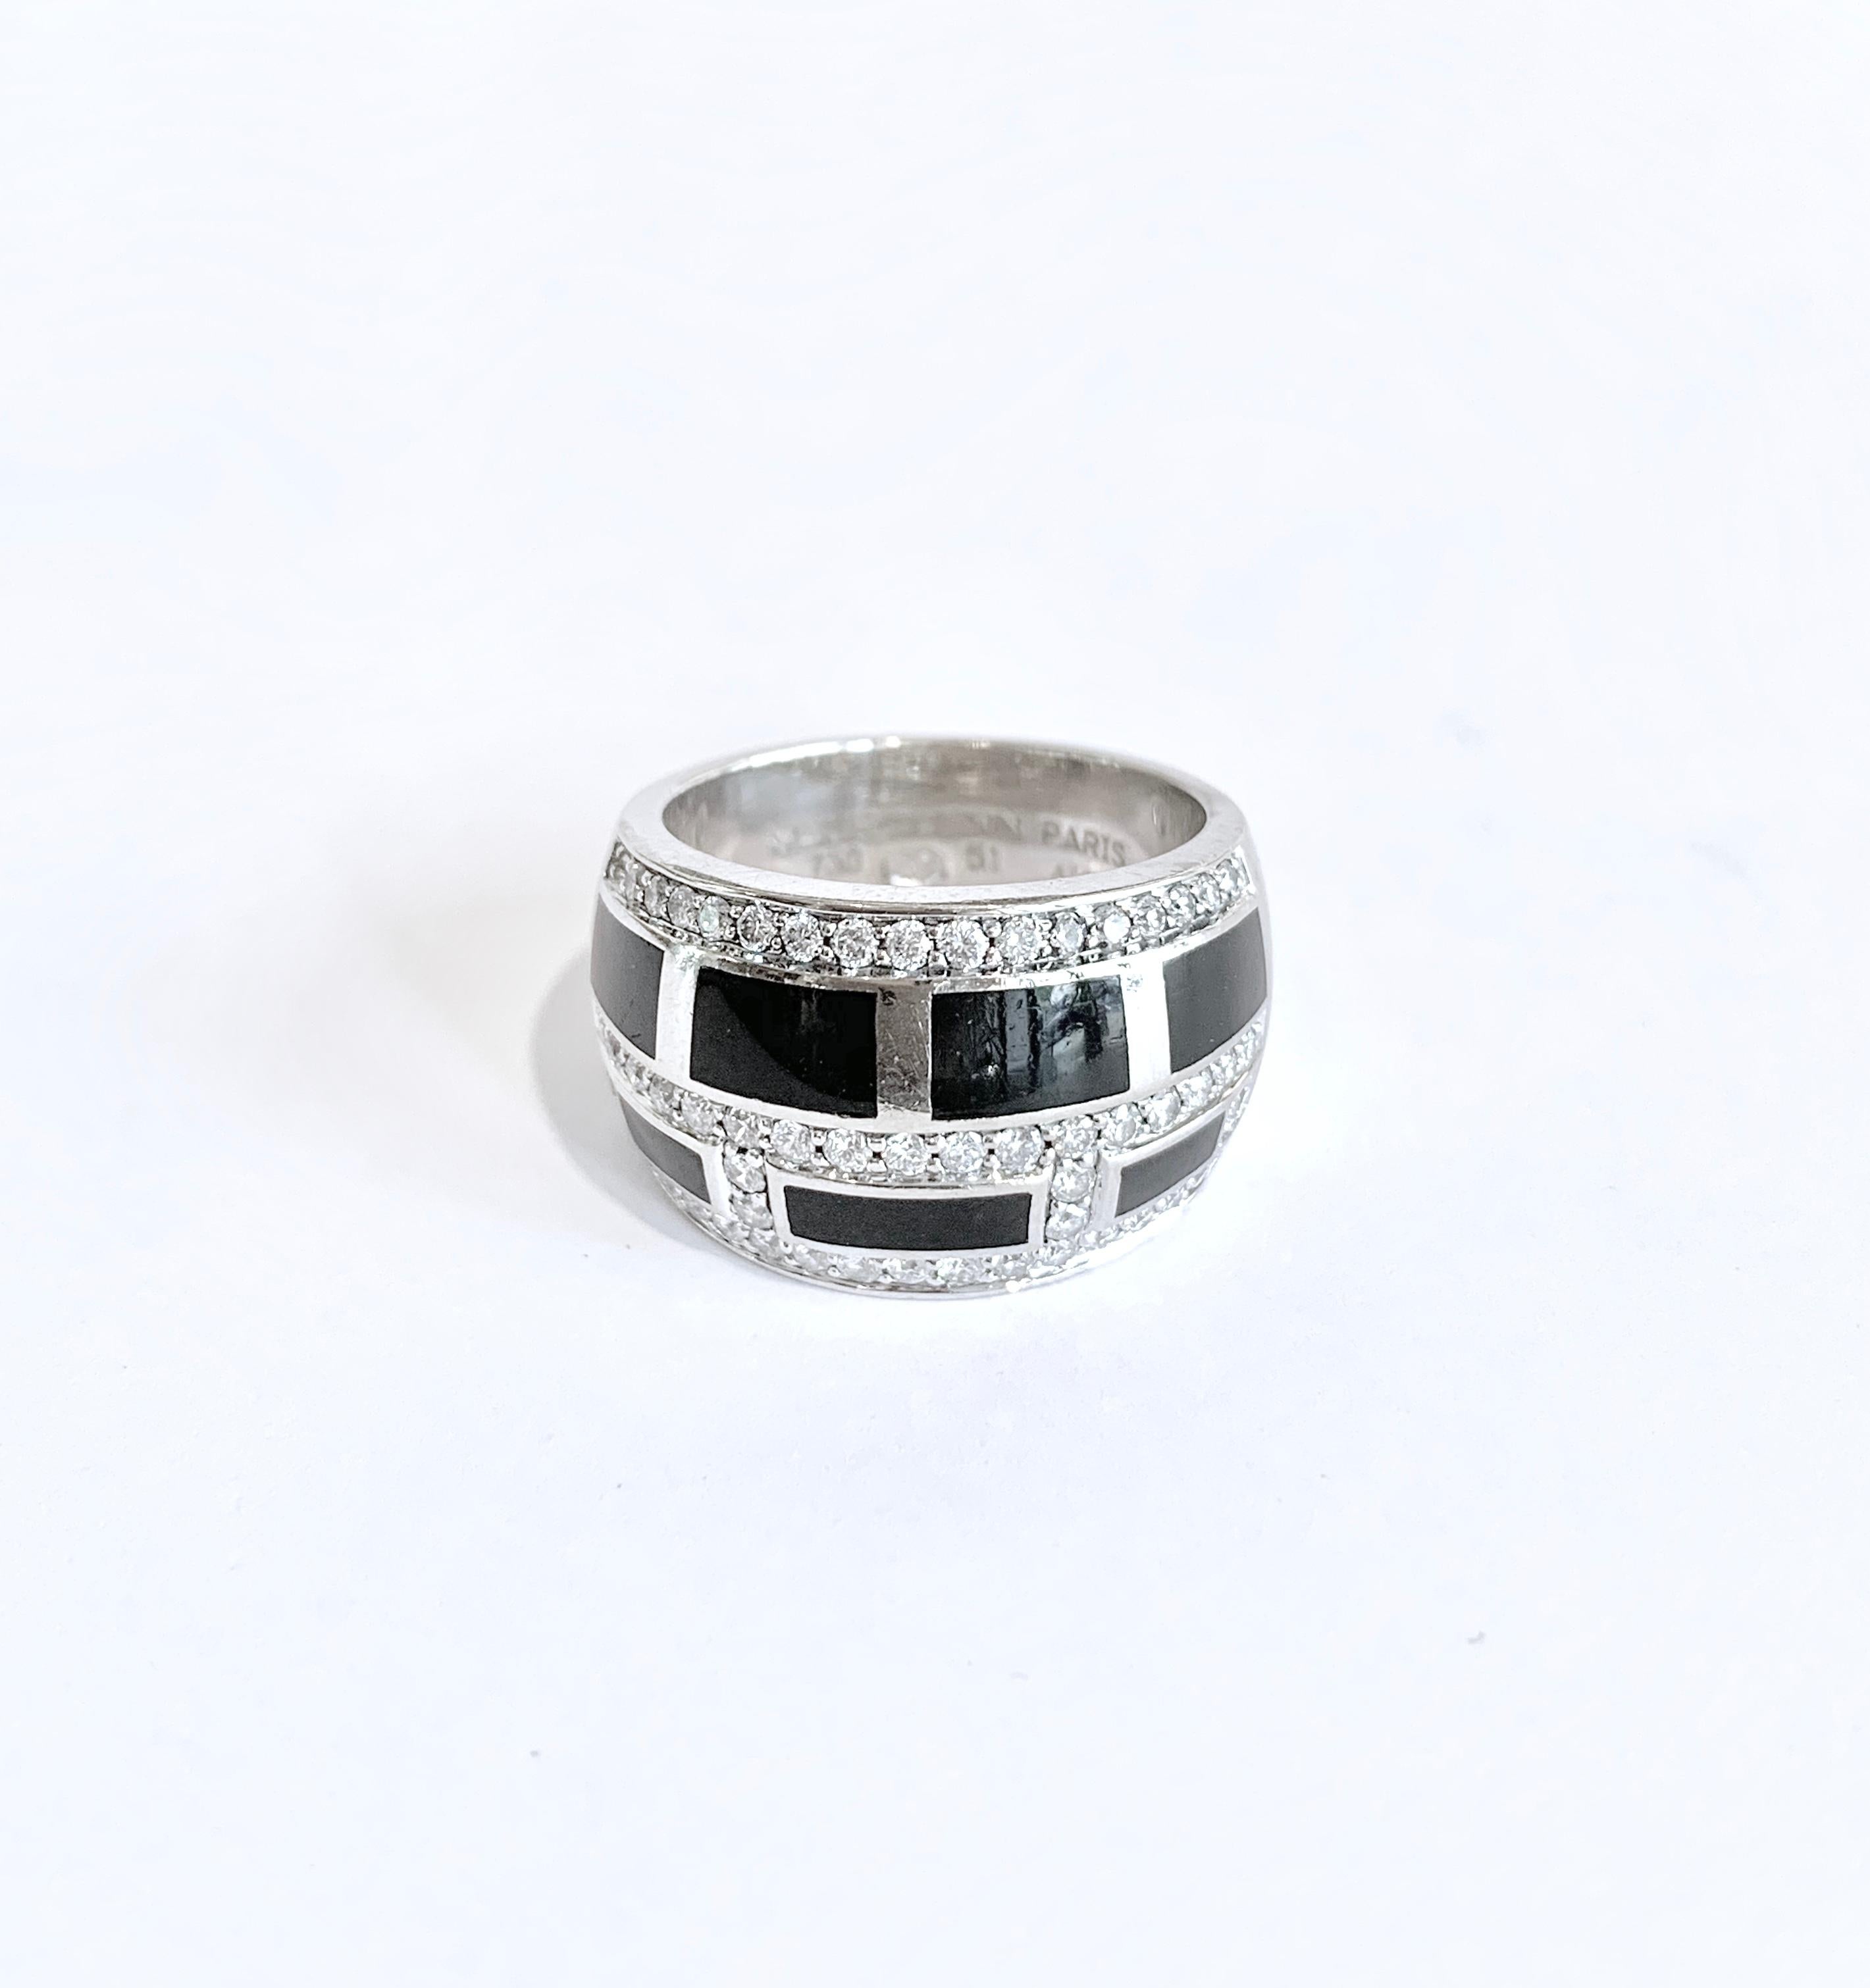 A Mauboussin “le Vice” diamonds and black lacquer 18 carats white gold ring

Diamonds weight: 0.65 carats H / SI

Numbered: AI8110

Width: 13mm

As New: bought in May 2016

Within its original box

Retails: more than 8500 euros